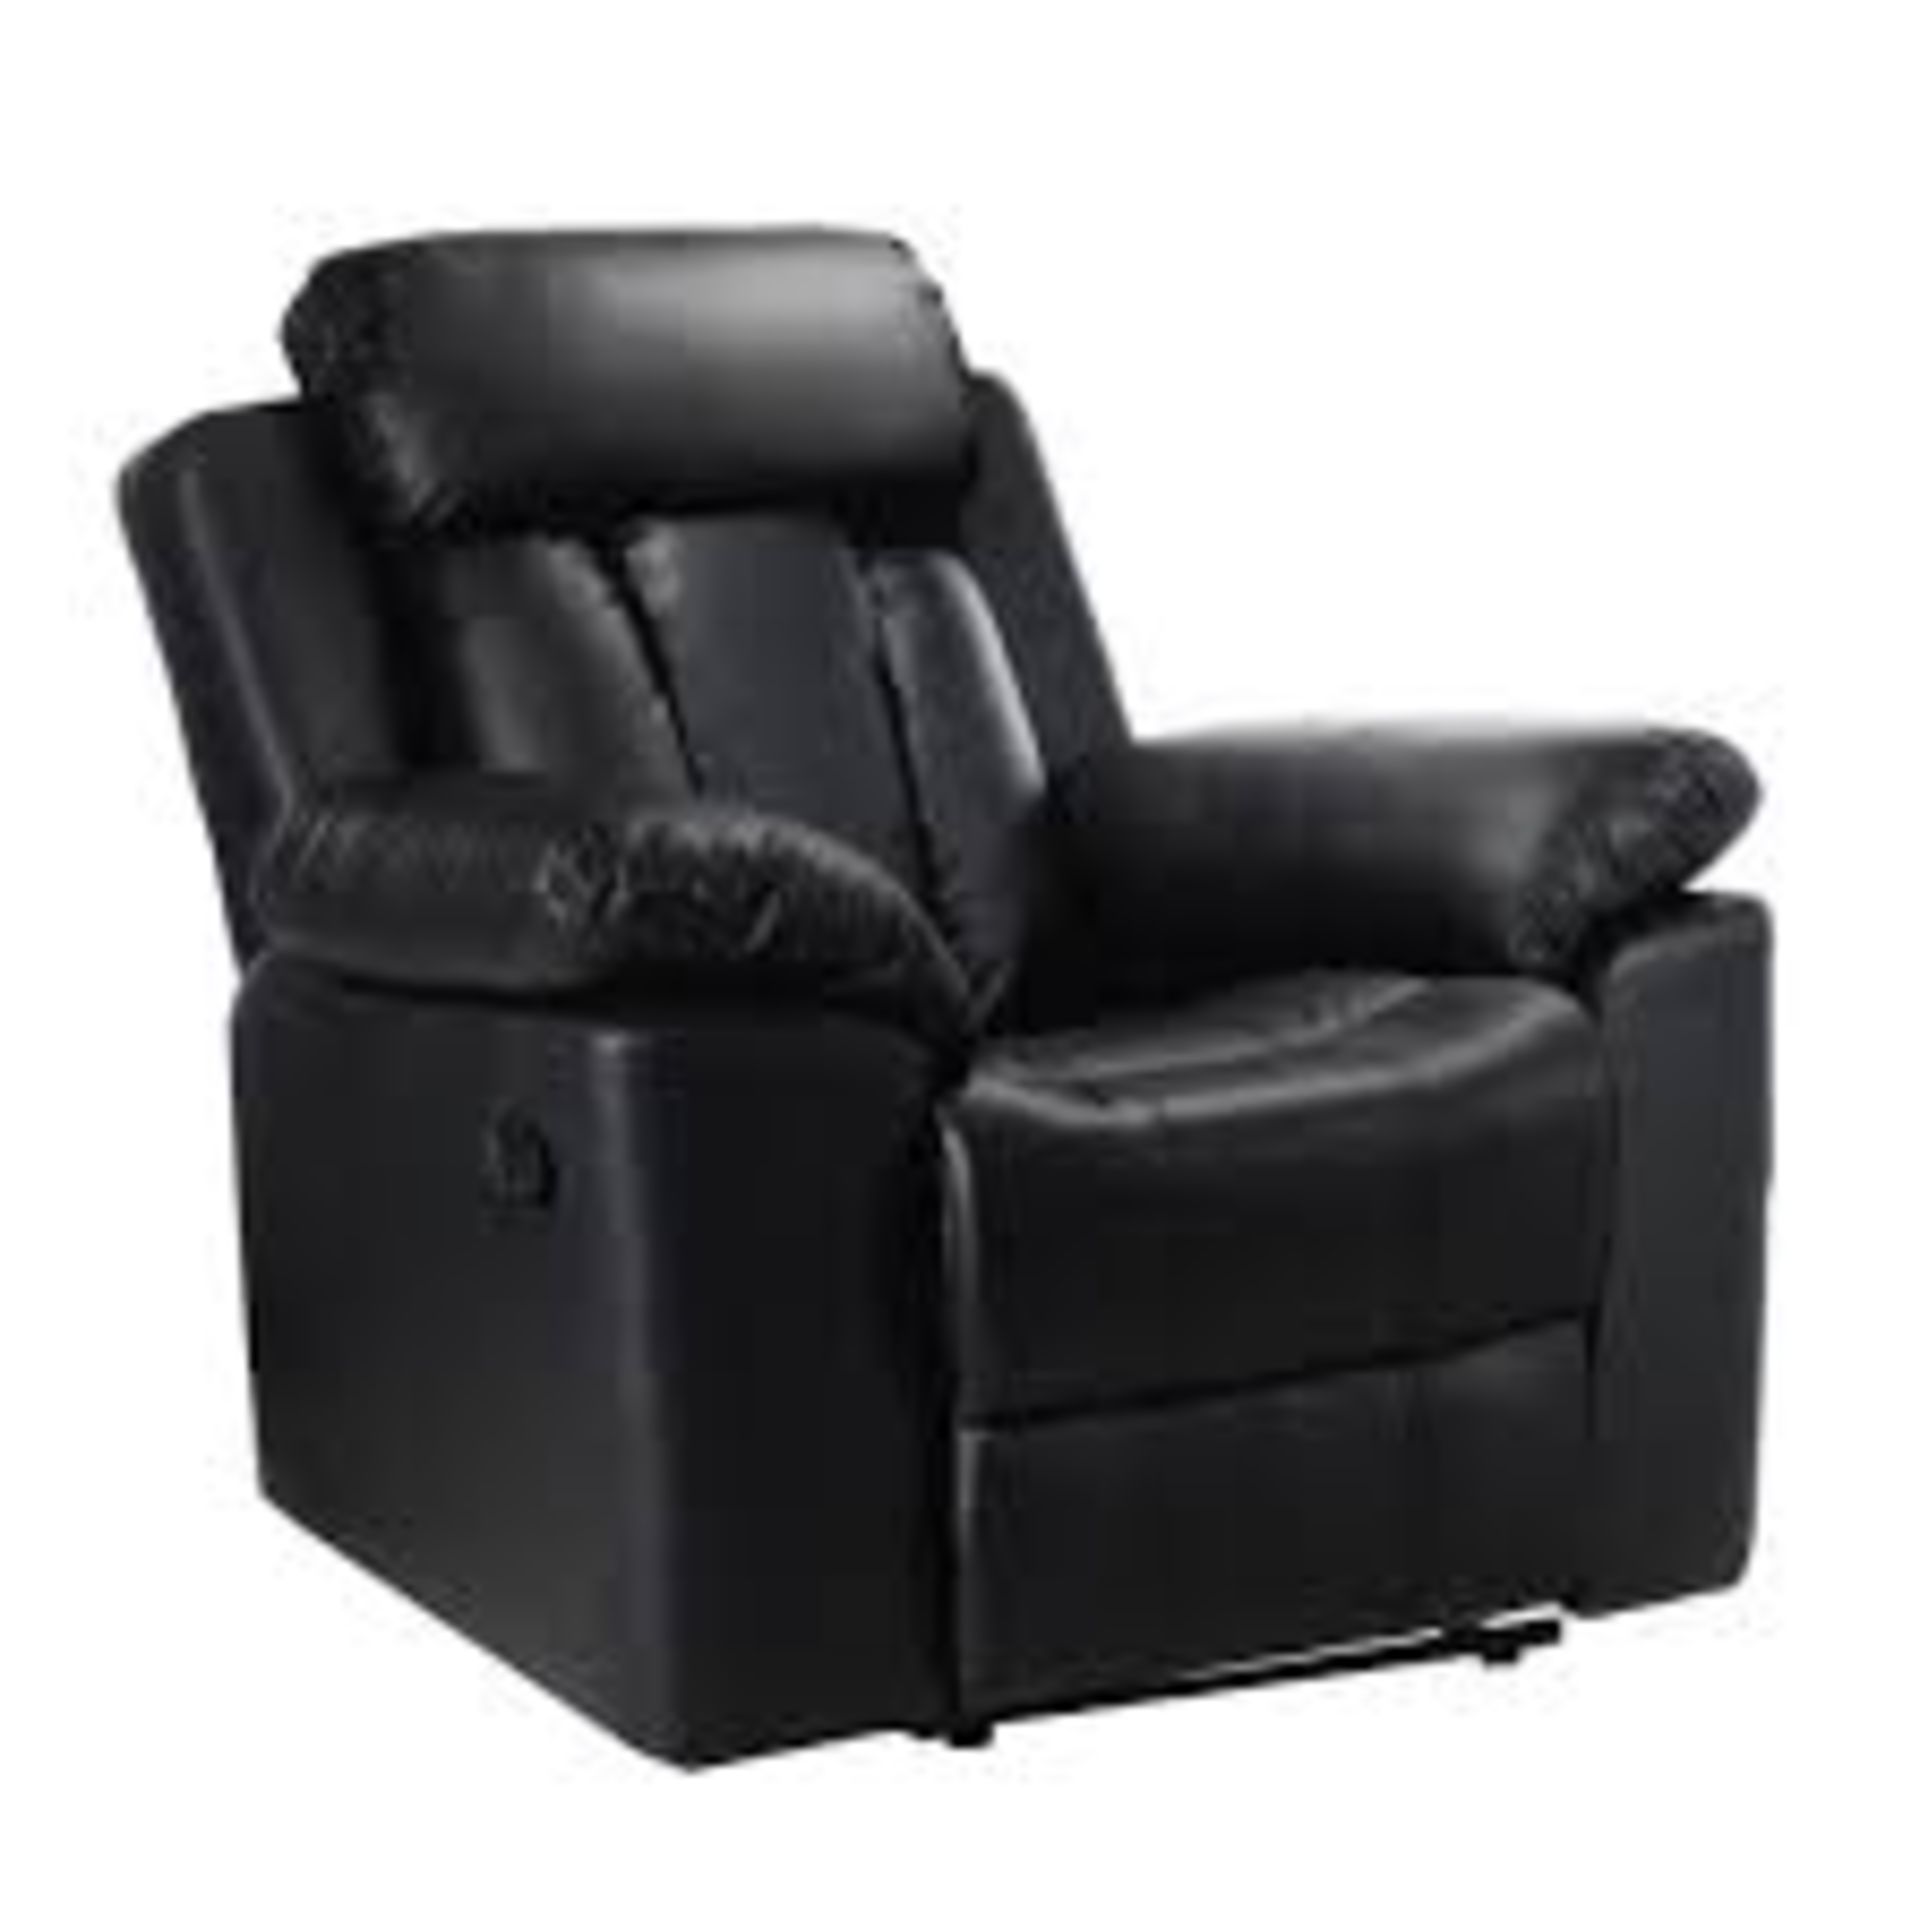 Brand New Boxed 3 Seater Manhattan Black Leather Manual Reclining Sofa Plus 2 Matching - Image 2 of 2